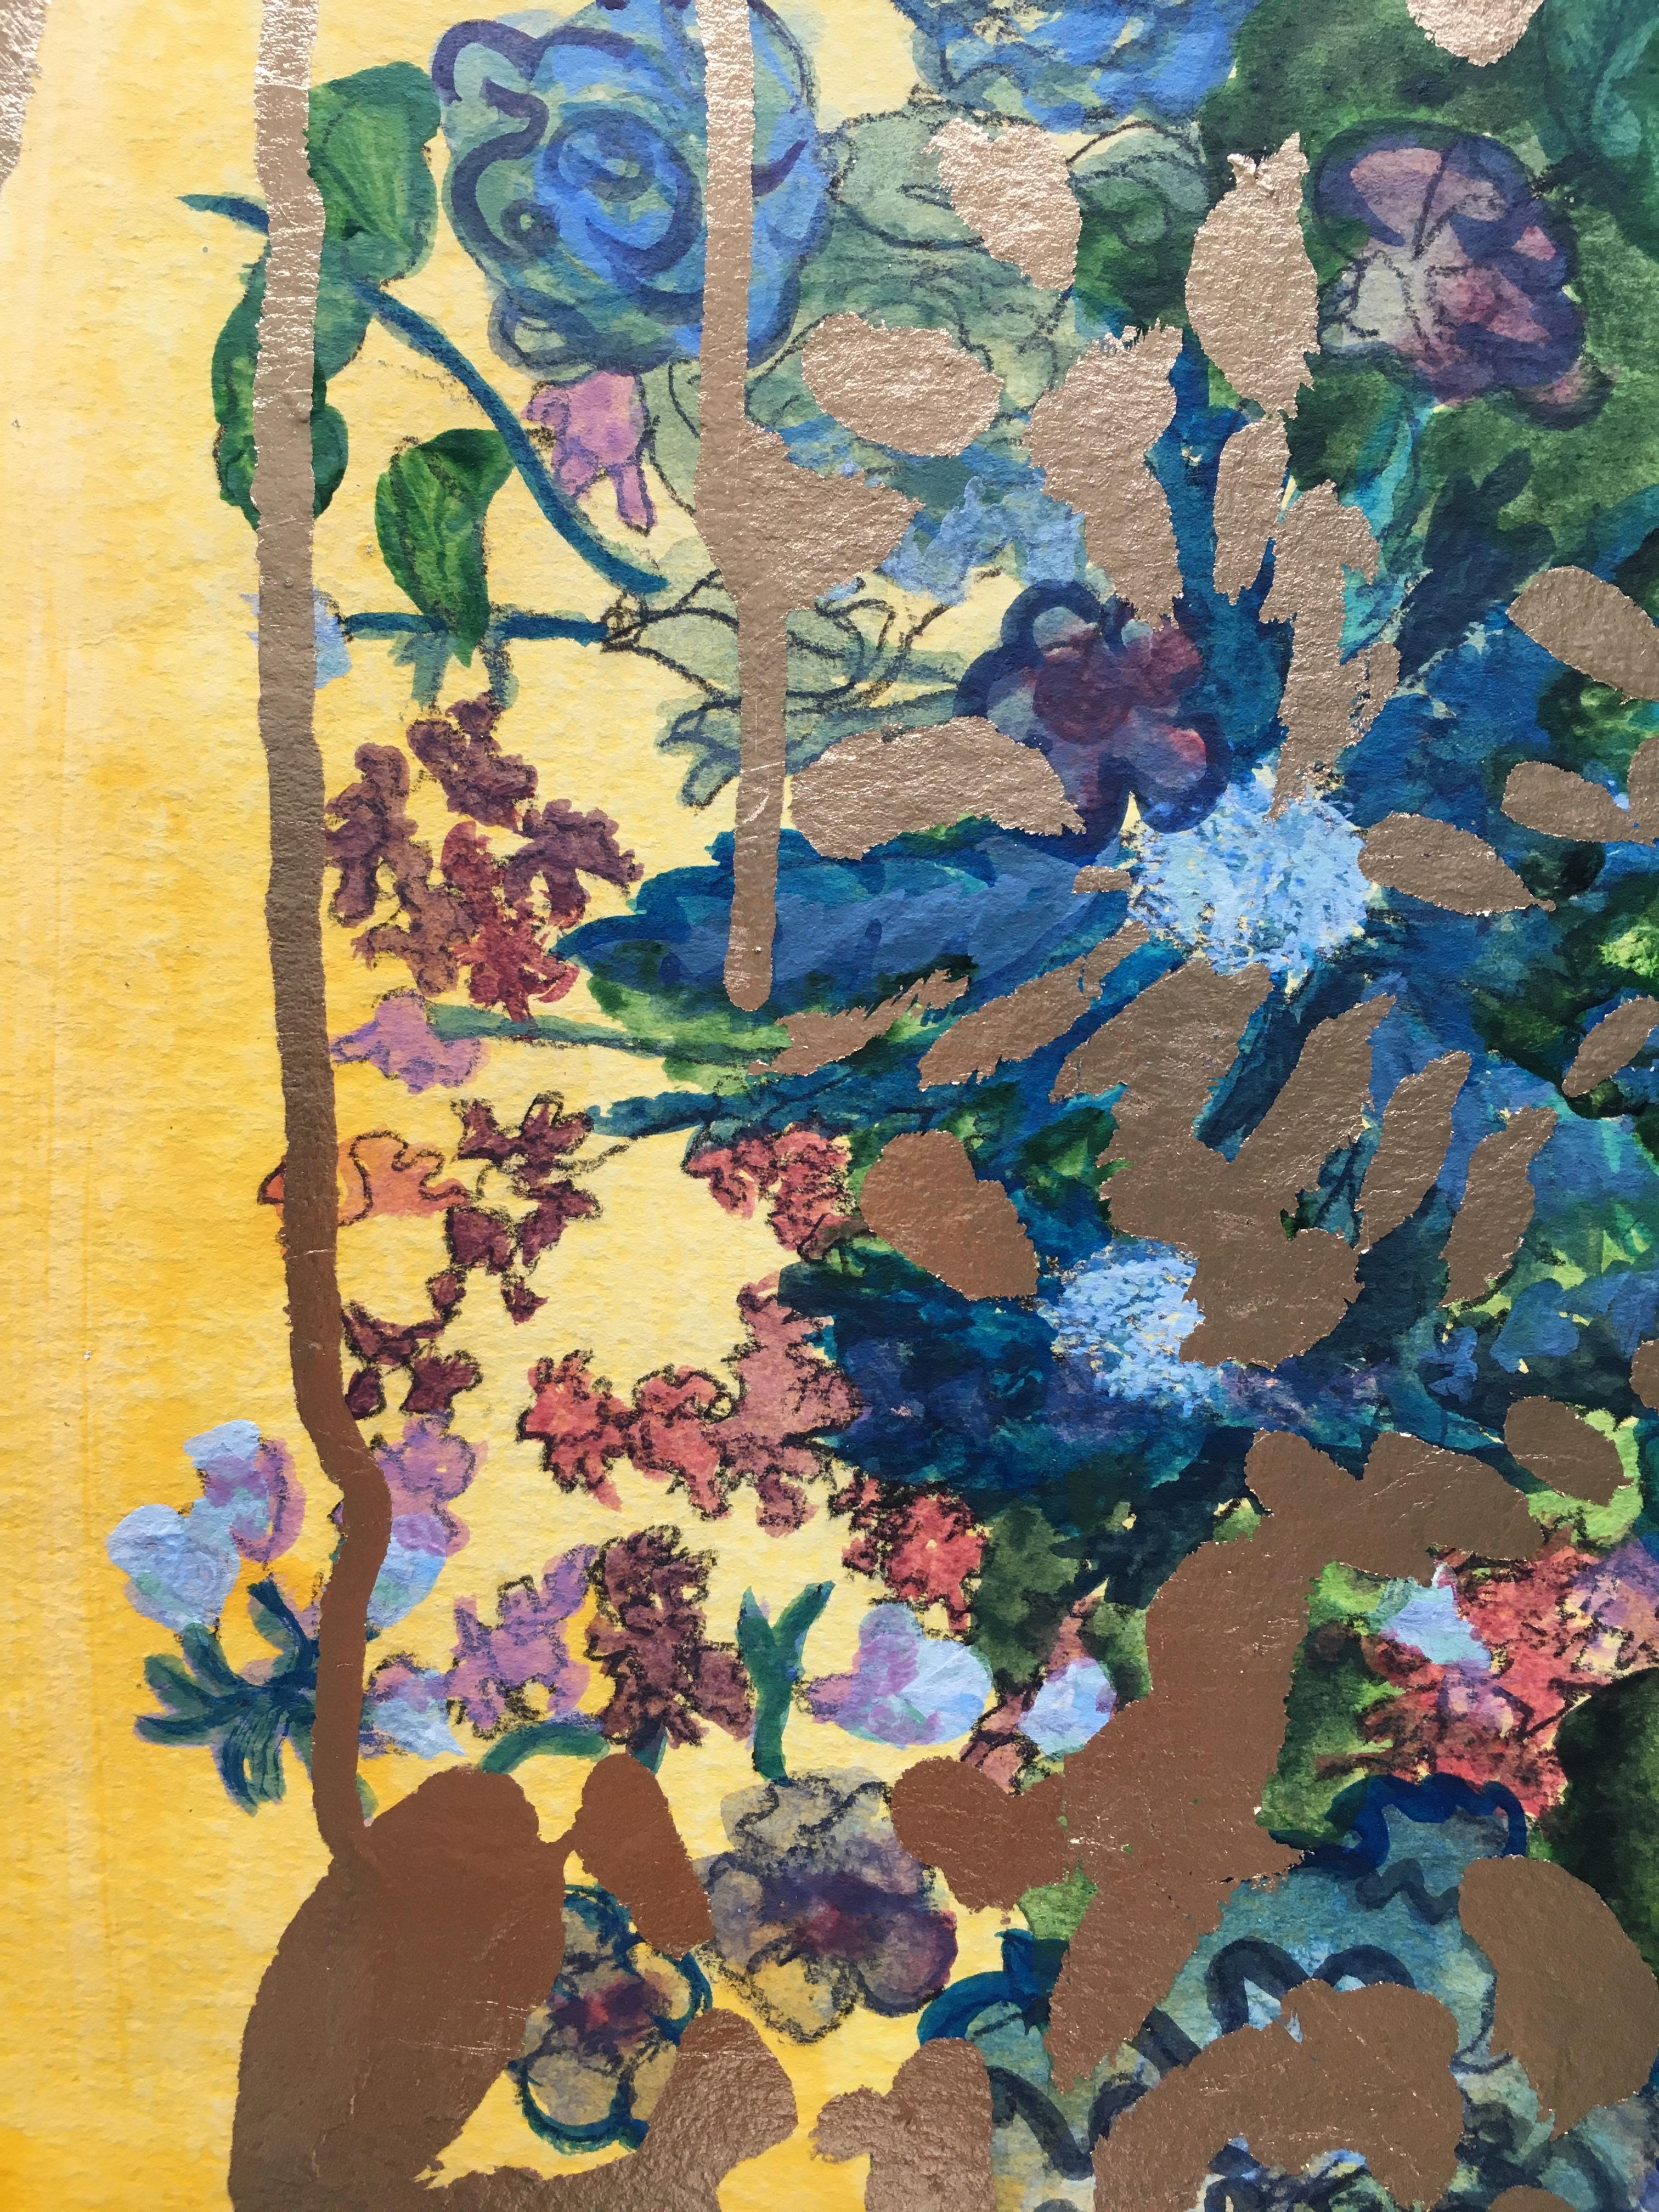 This painting is one of the Summer Bloom series by Shizico Yi, started in 2022. We offer Artist's Lifetime Warranty for the original artwork.

Shizico lost her beloved dog, Favor after four years of battle with a neurology disease in 2017. Shizico